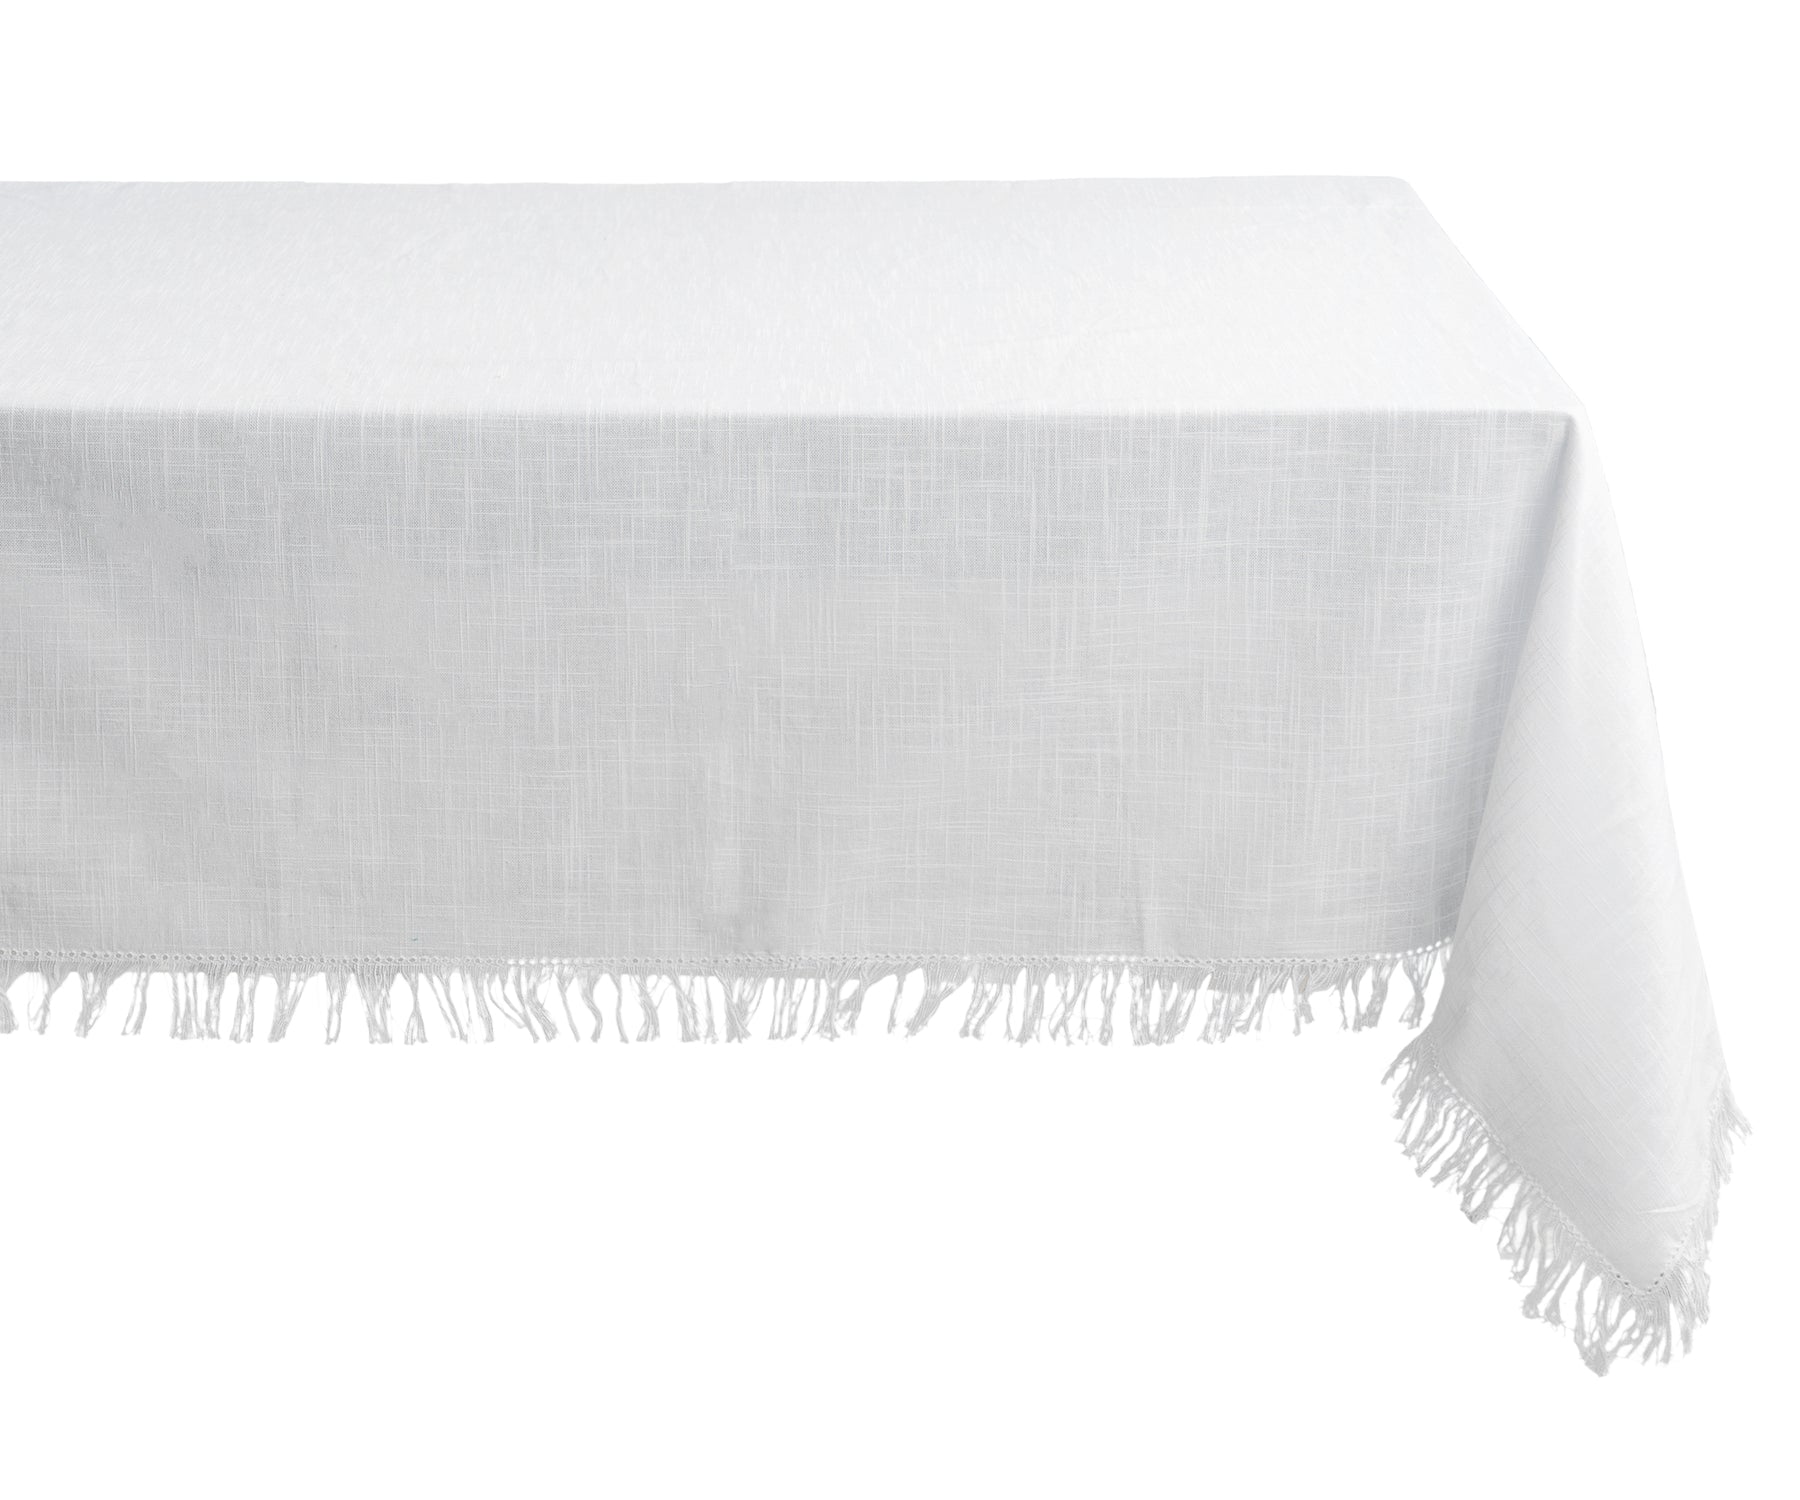 White tablecloths offer timeless elegance and adapt beautifully to diverse events, from casual to formal.Hard-wearing black round tablecloth, perfect for everyday use